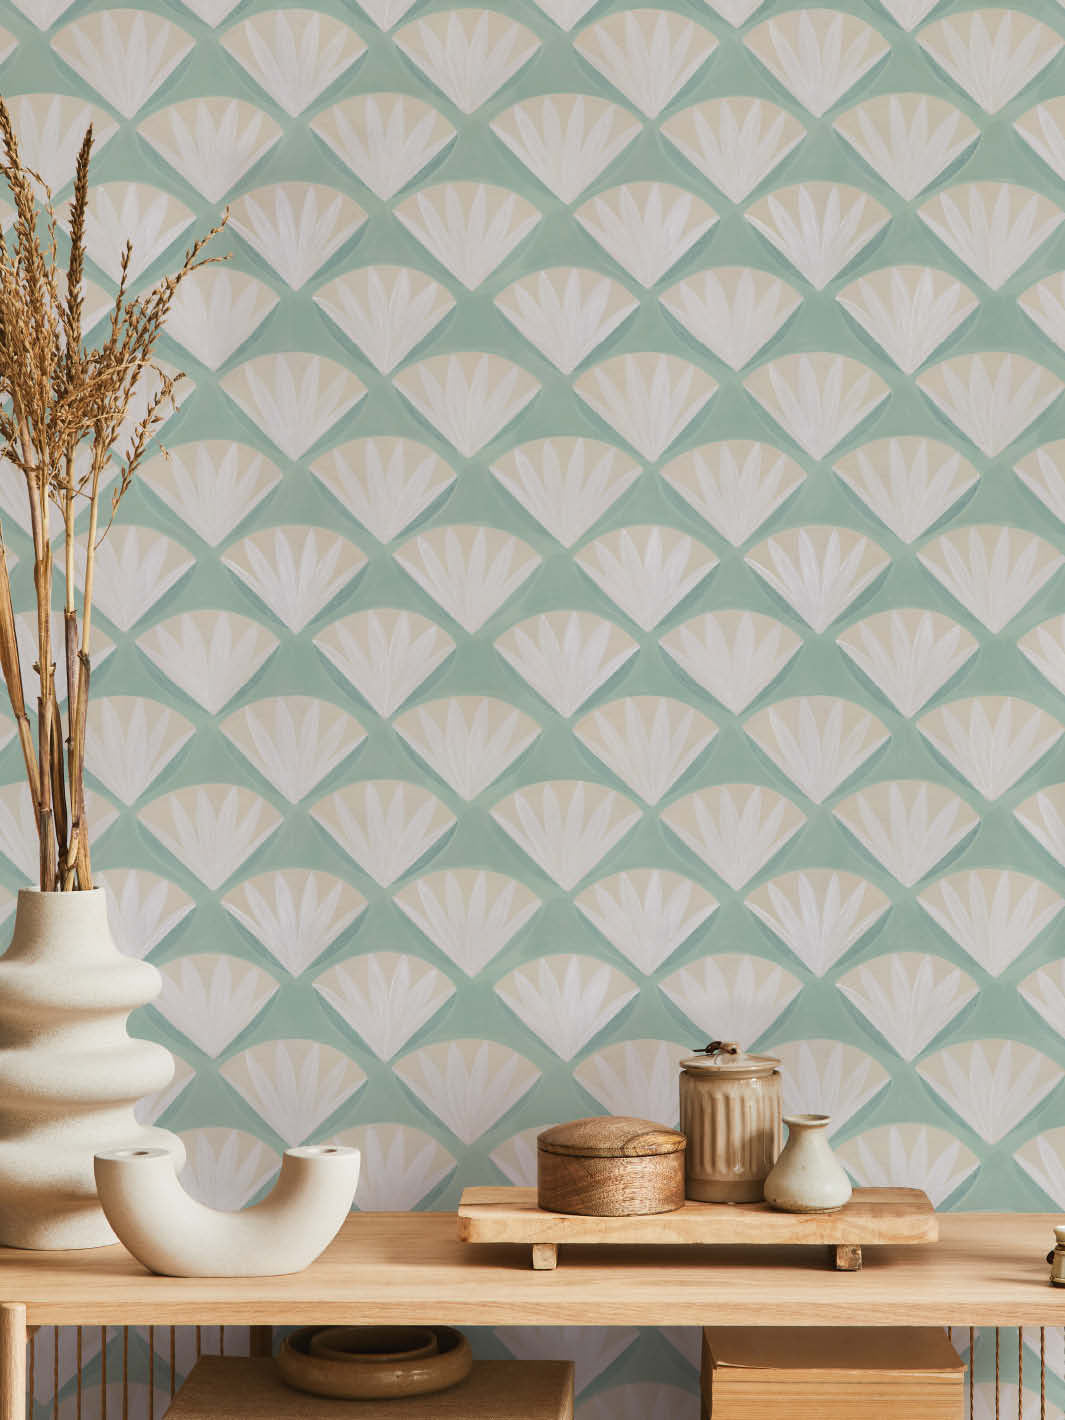 Geometric Flower Pattern Self Adhesive Vinyl Wallpaper by Livettes 3400   Home office design Interior Home